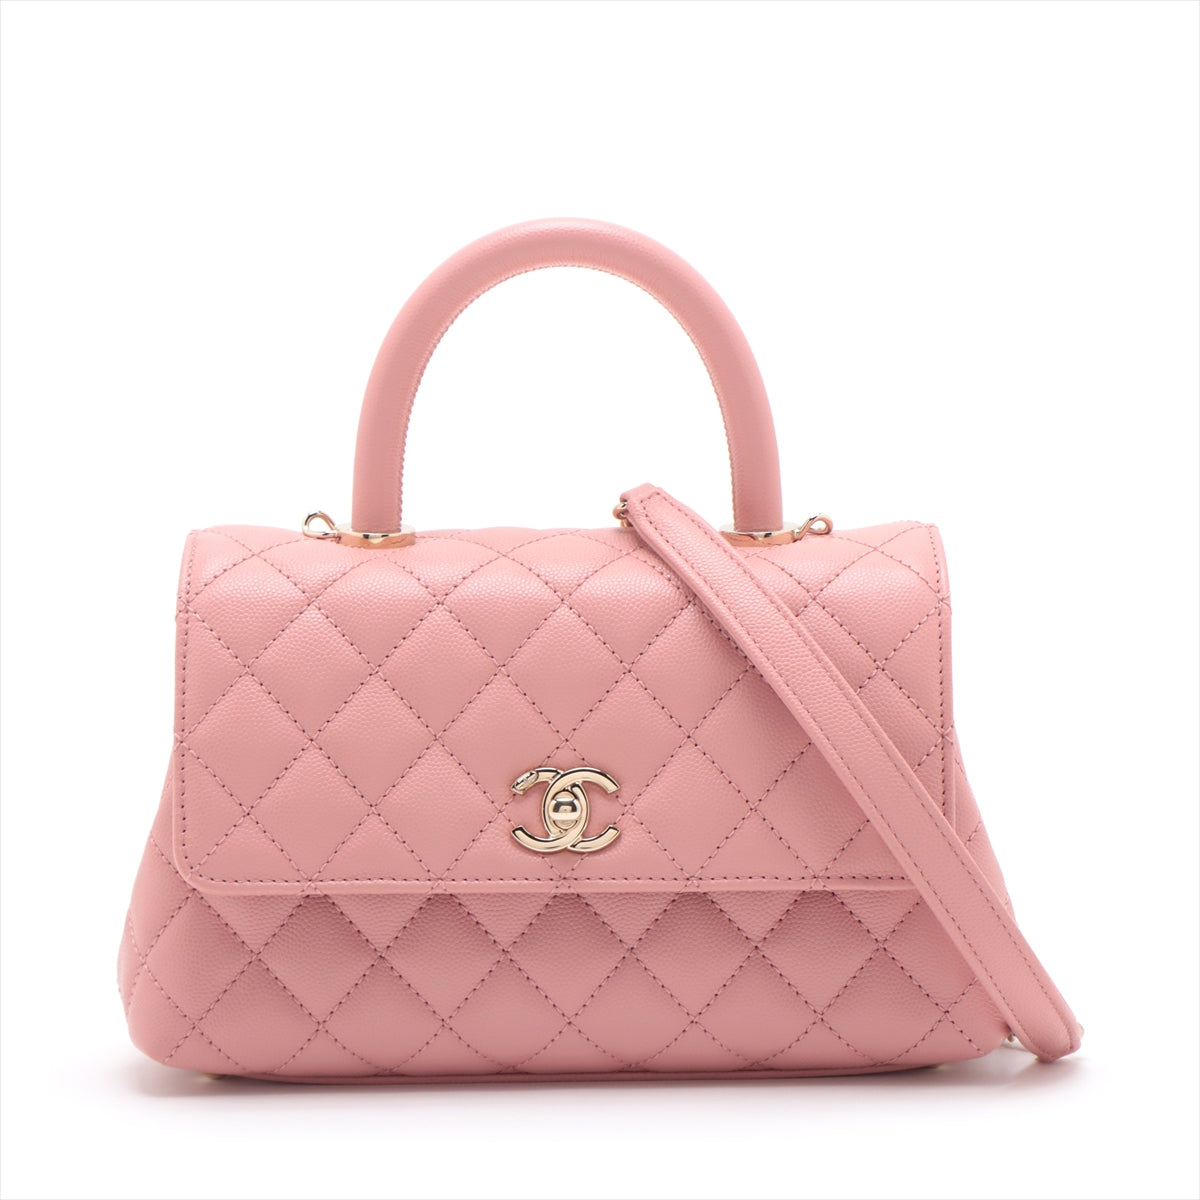 Chanel Coco handle 24 XS Caviar Skin 2 Way Handbag Pink Gold Metal Fittings A92990 There is a loose turn lock